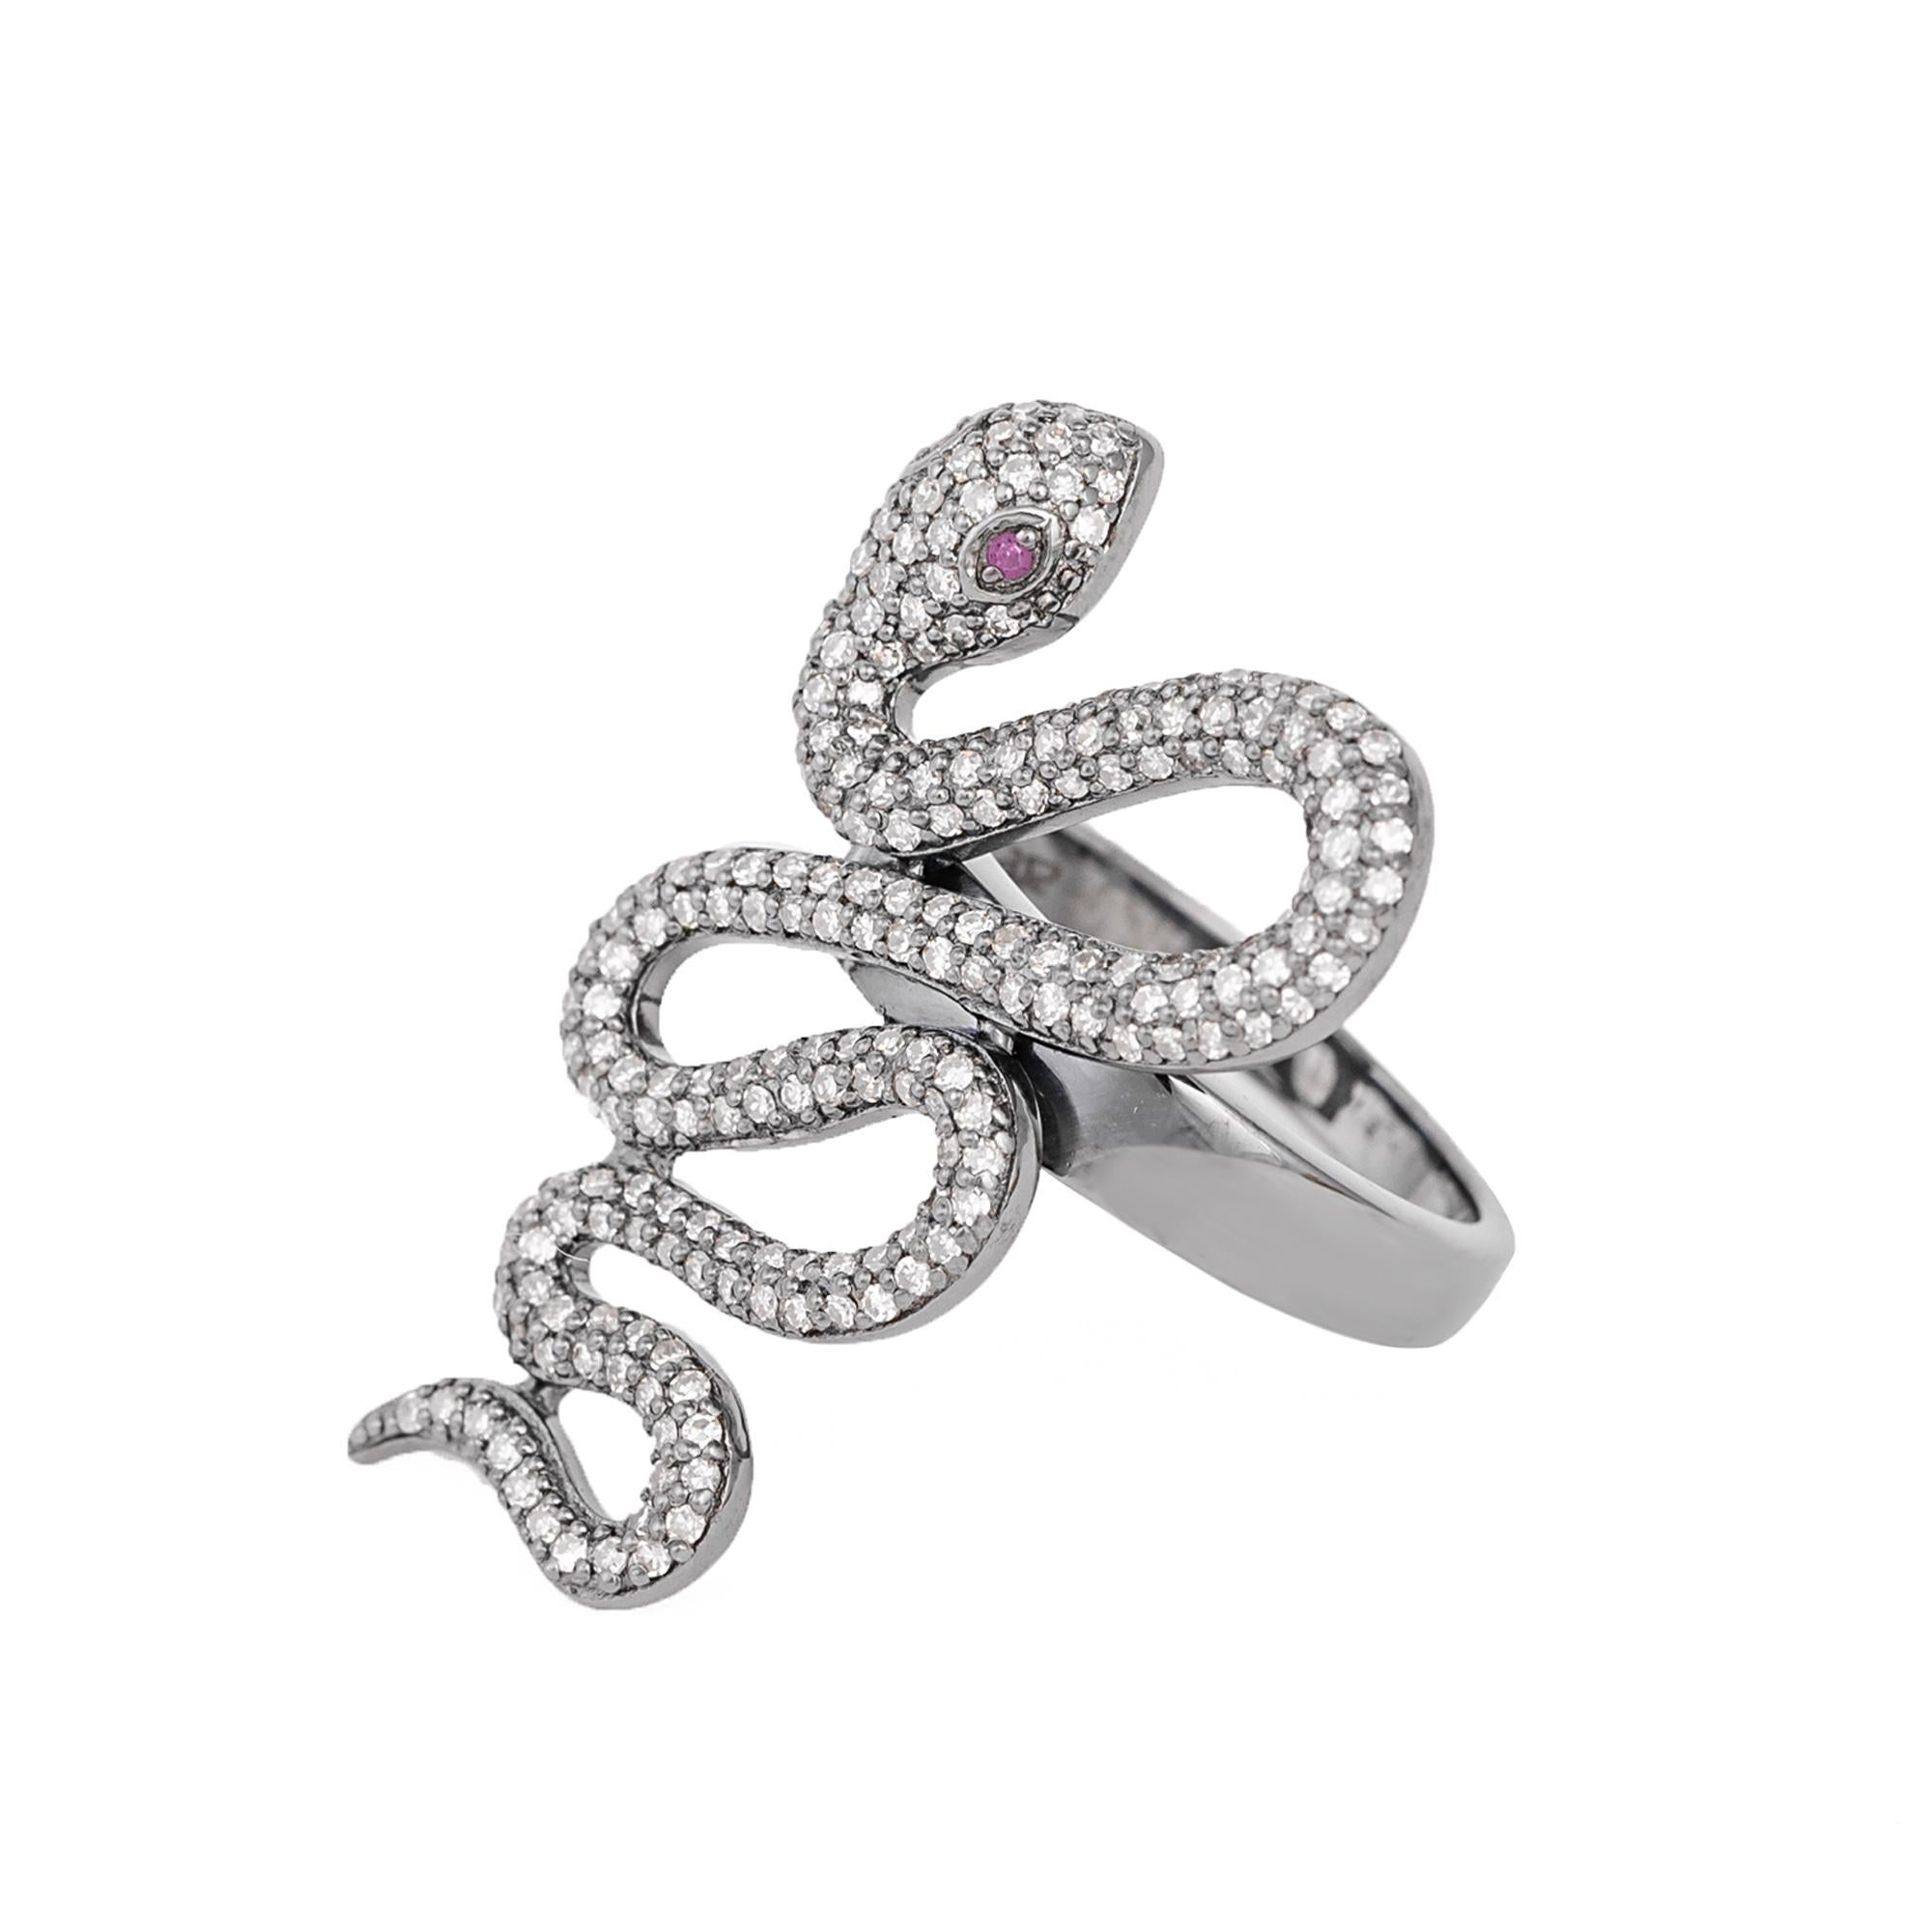 1.15 Carat Diamond Serpent Snake Ring 

This Victorian art-deco style visceral reptile long snake zigzag diamond ring is articulate. The pave set round diamonds form the body of the snake through the perfect curves and angling creating the hypnotic